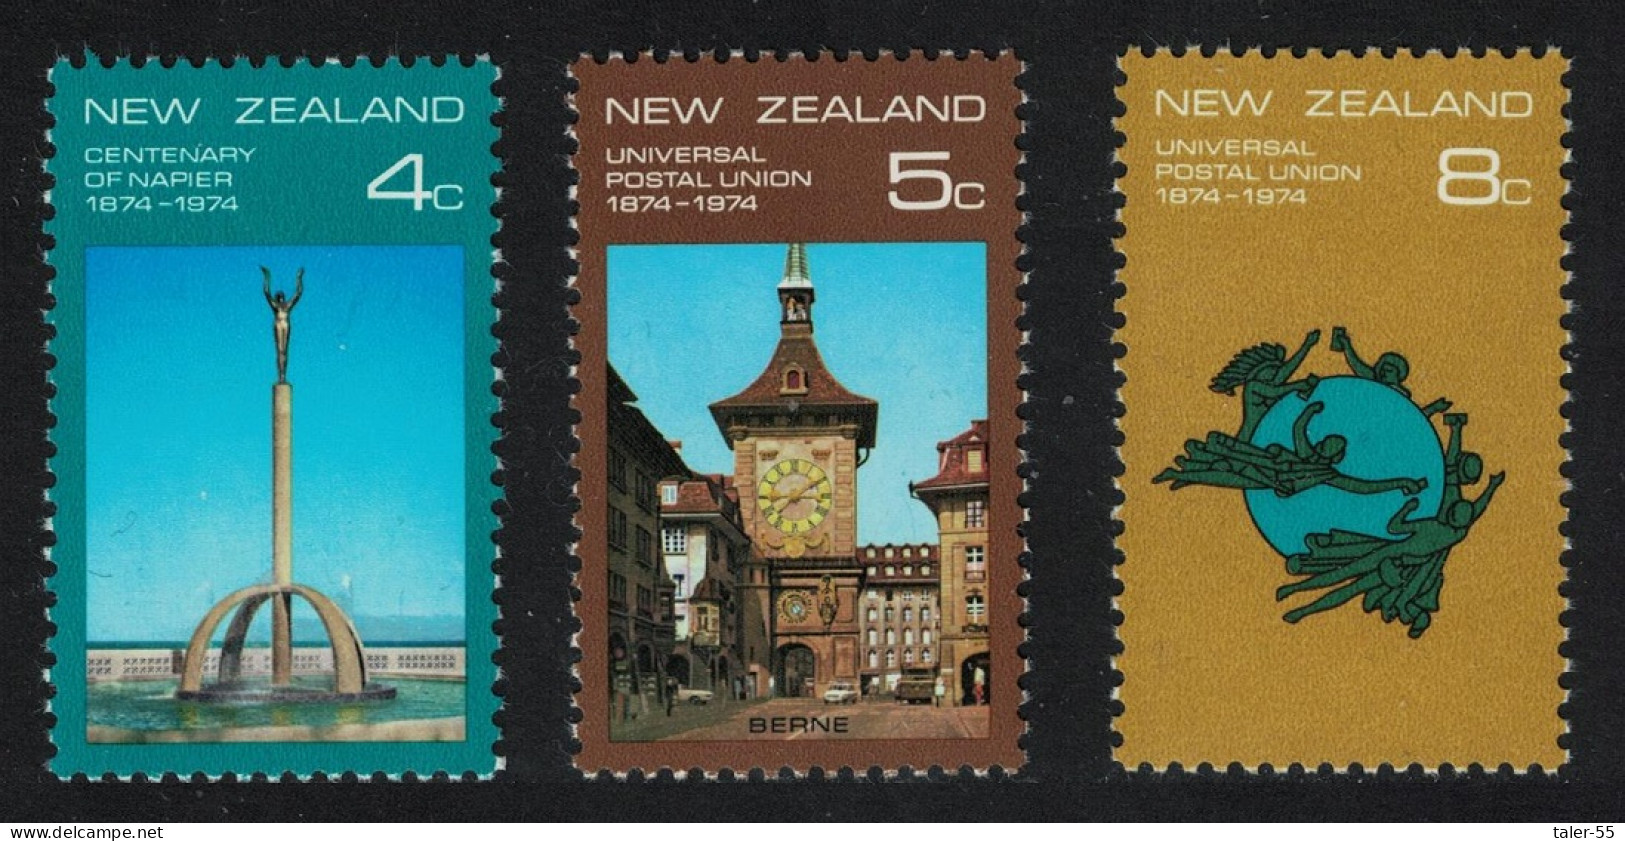 New Zealand Centenaries Of Napier And UPU 3v 1974 MNH SG#1047-1049 - Unused Stamps